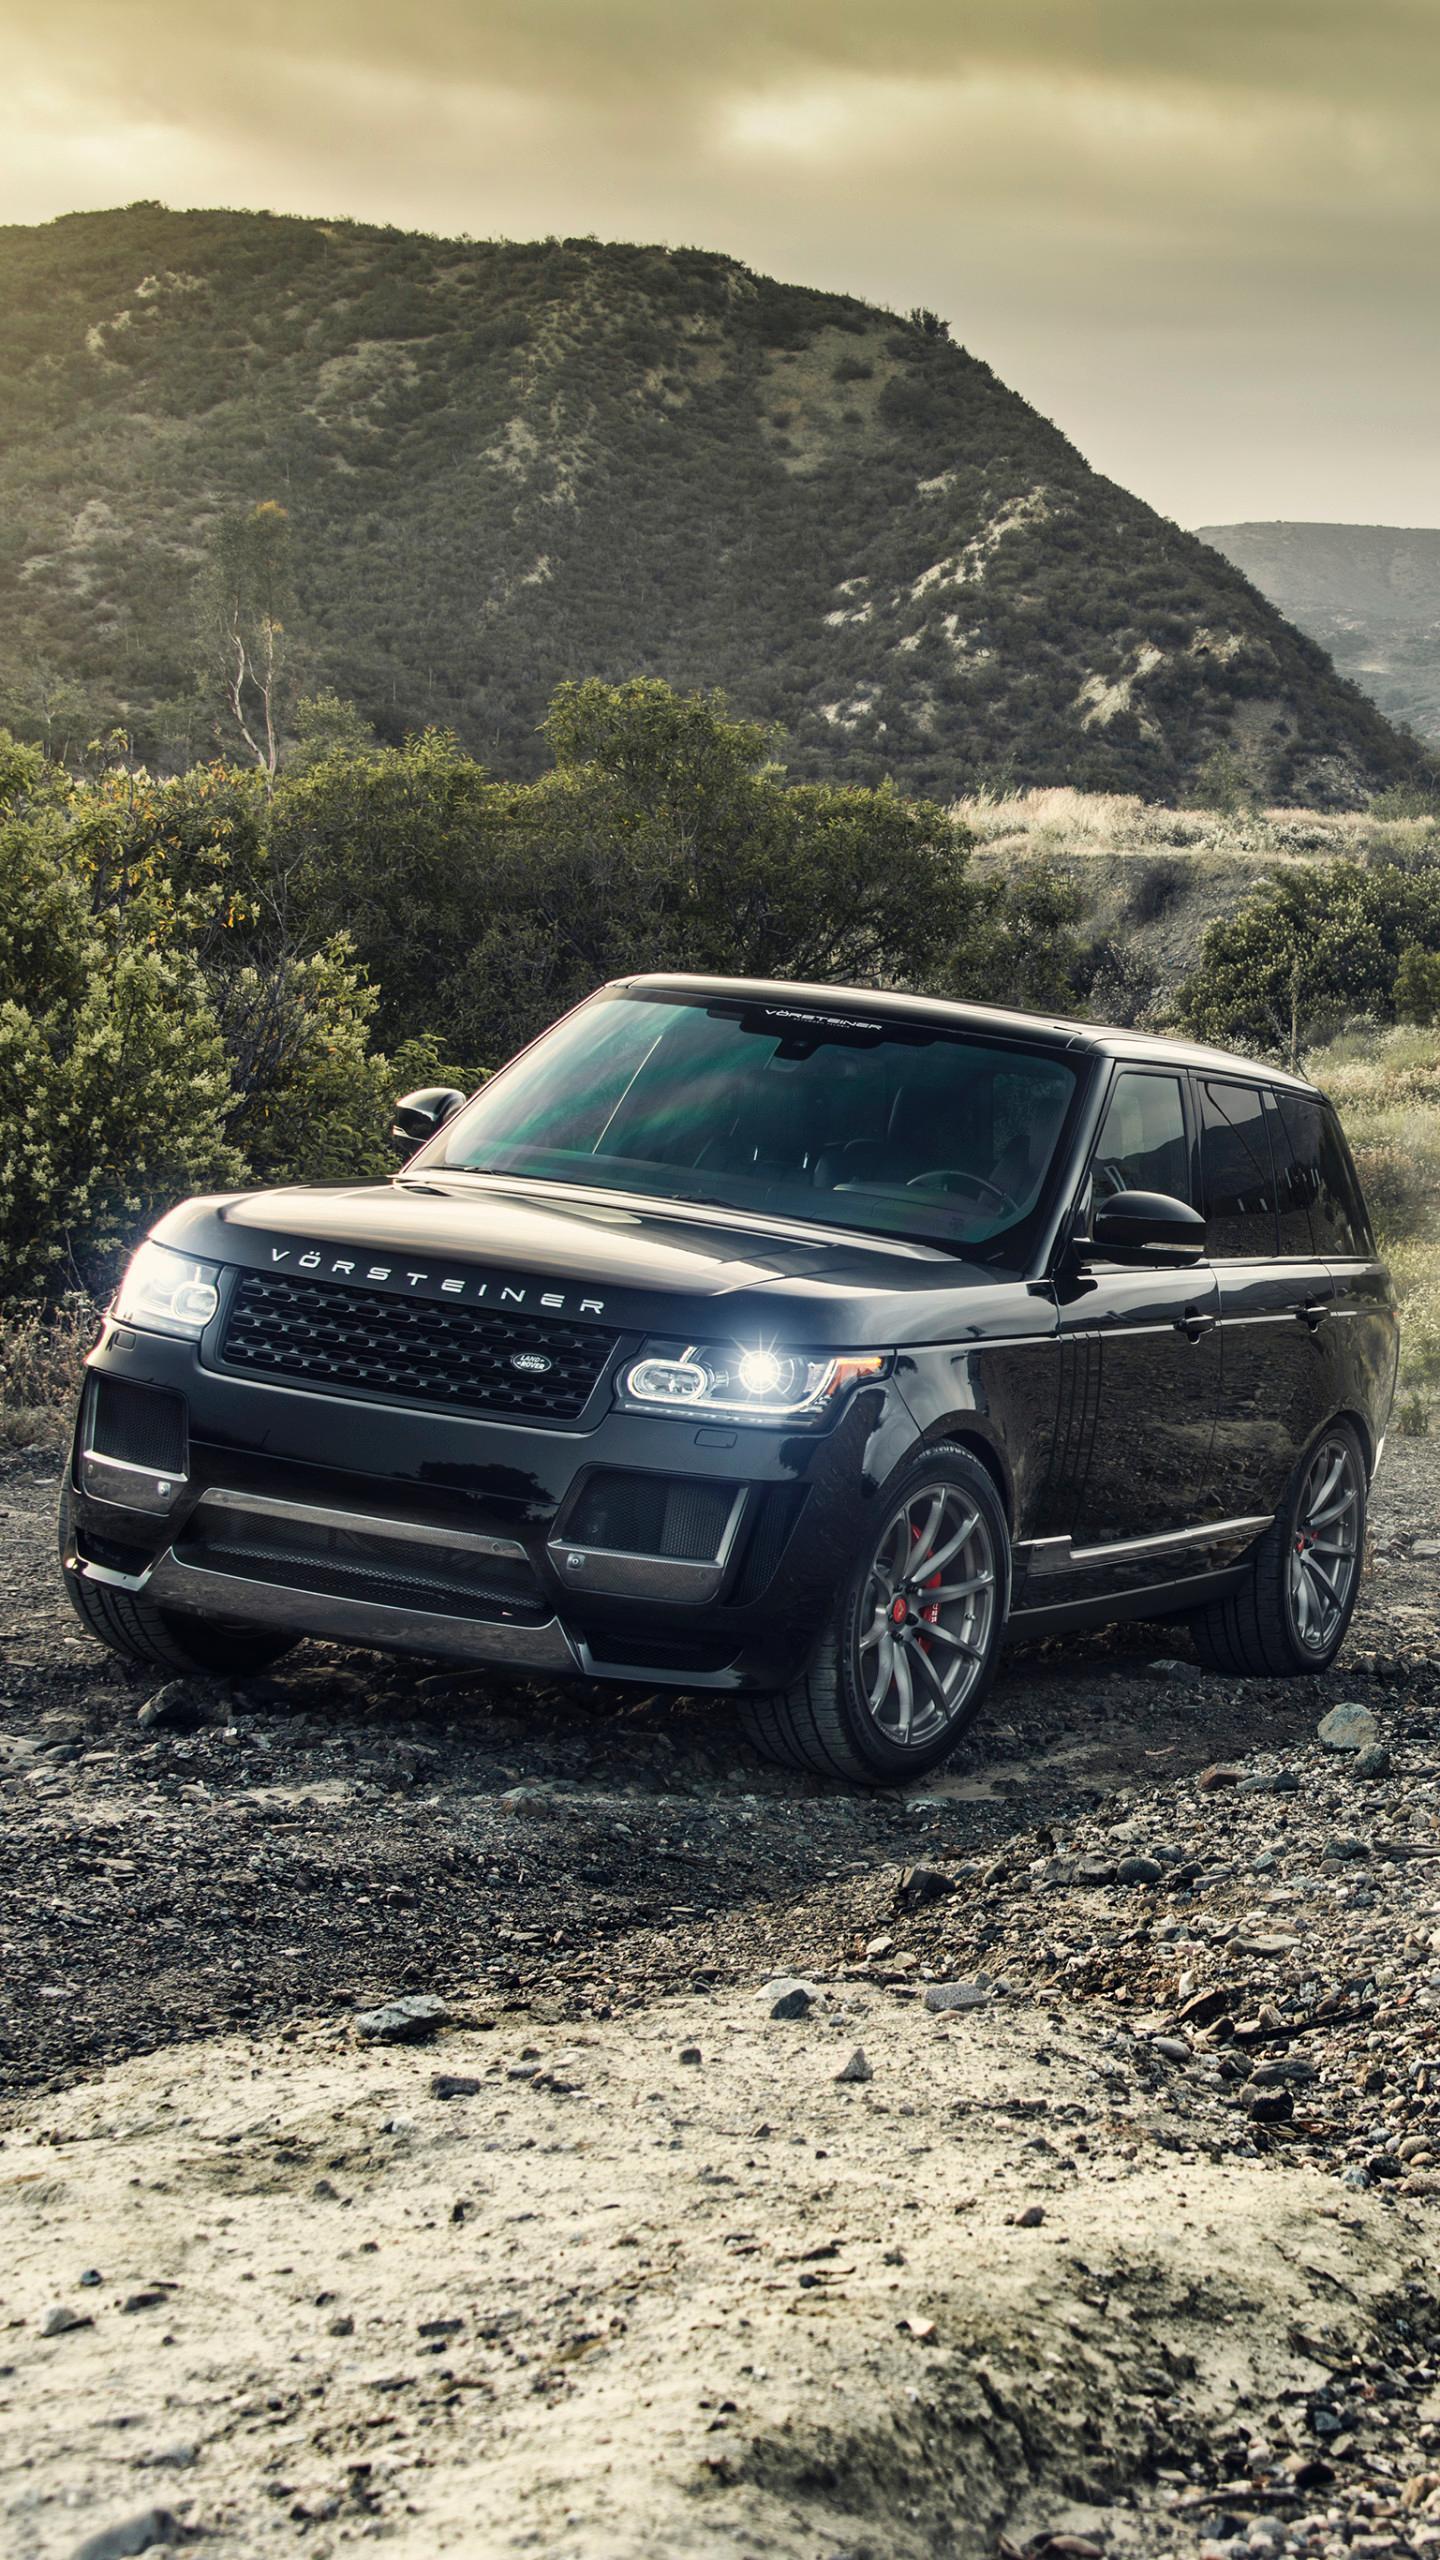 Range Rover iPhone Wallpaper, Picture